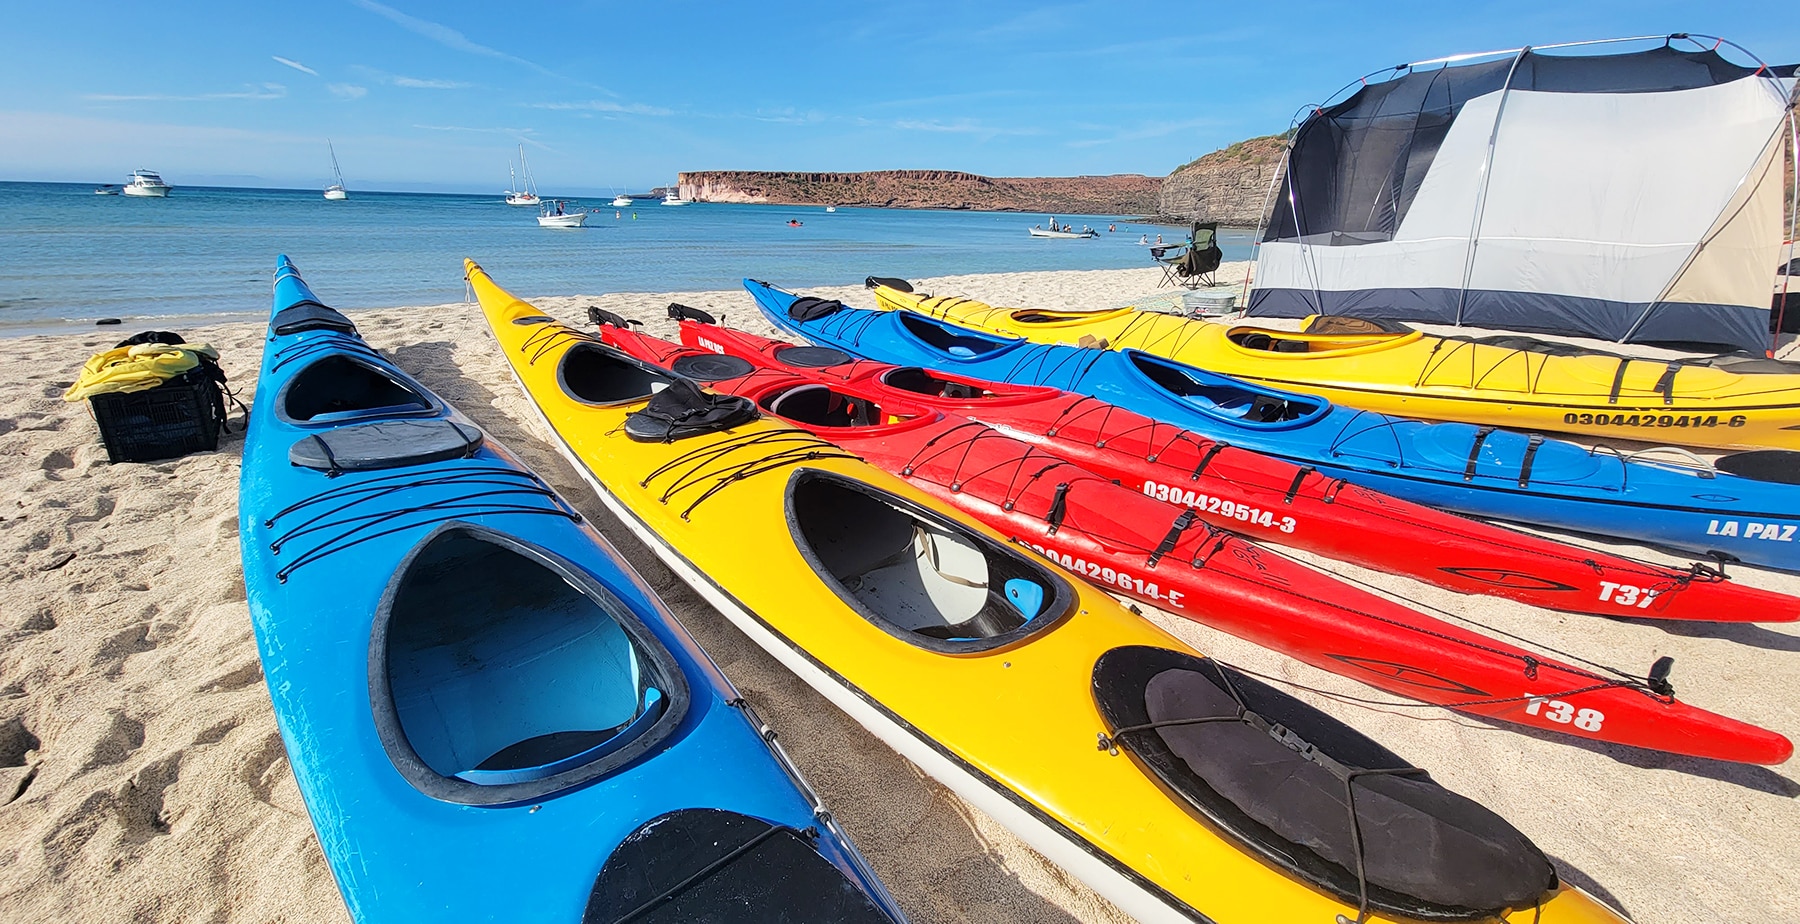 Go sea kayaking in Baja, Mexico with Canyon Calling small group tours for women